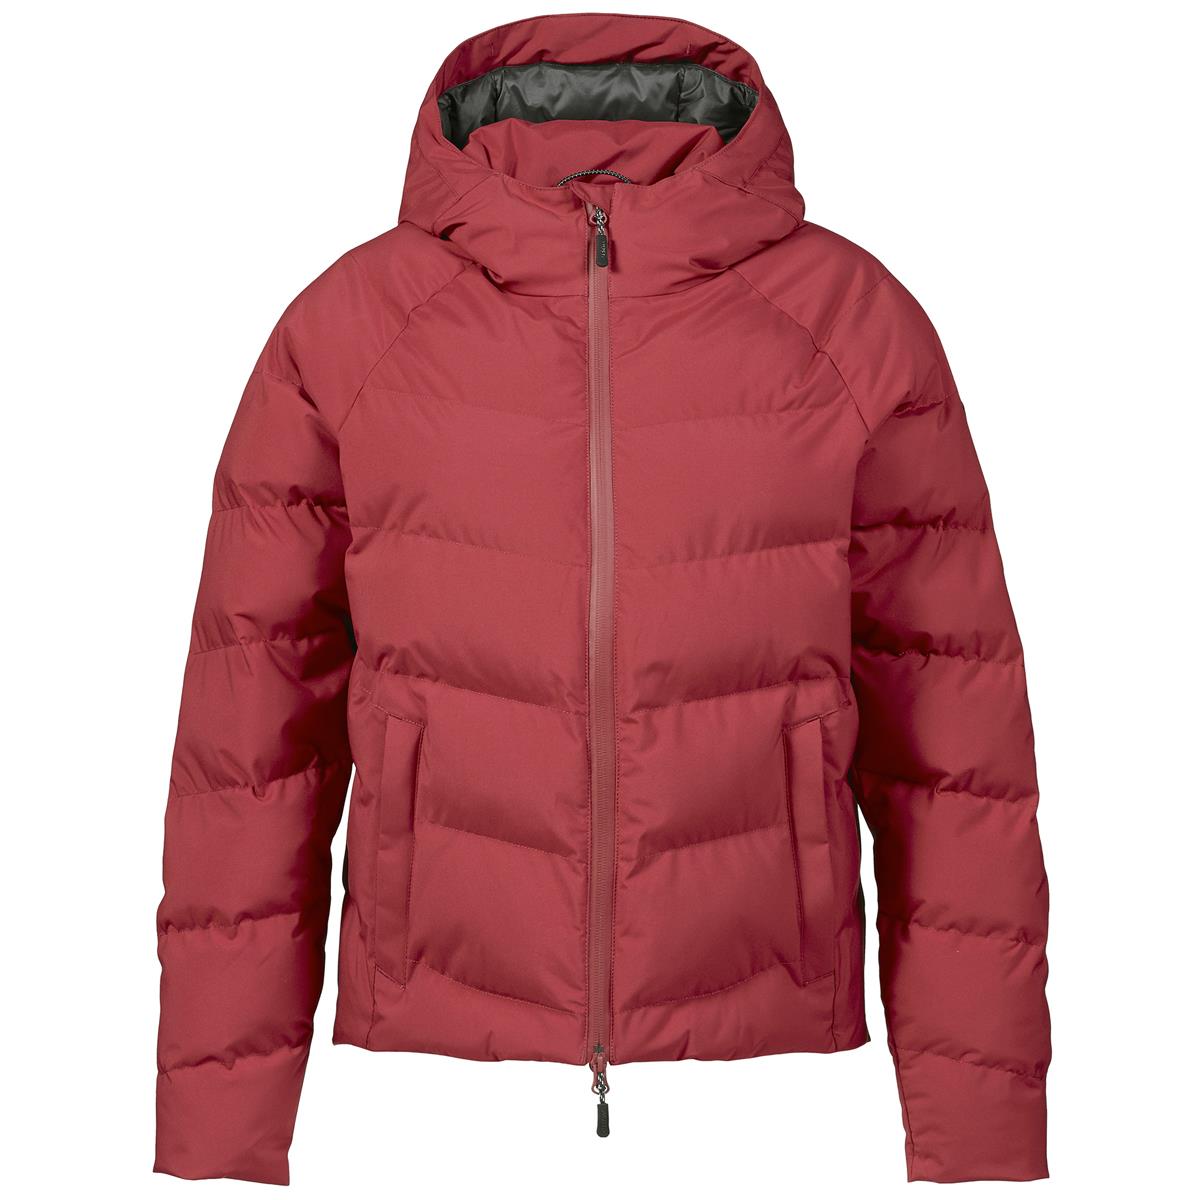 What's the garment chest size for a size 16 Musto Marina Quilted Jacket?